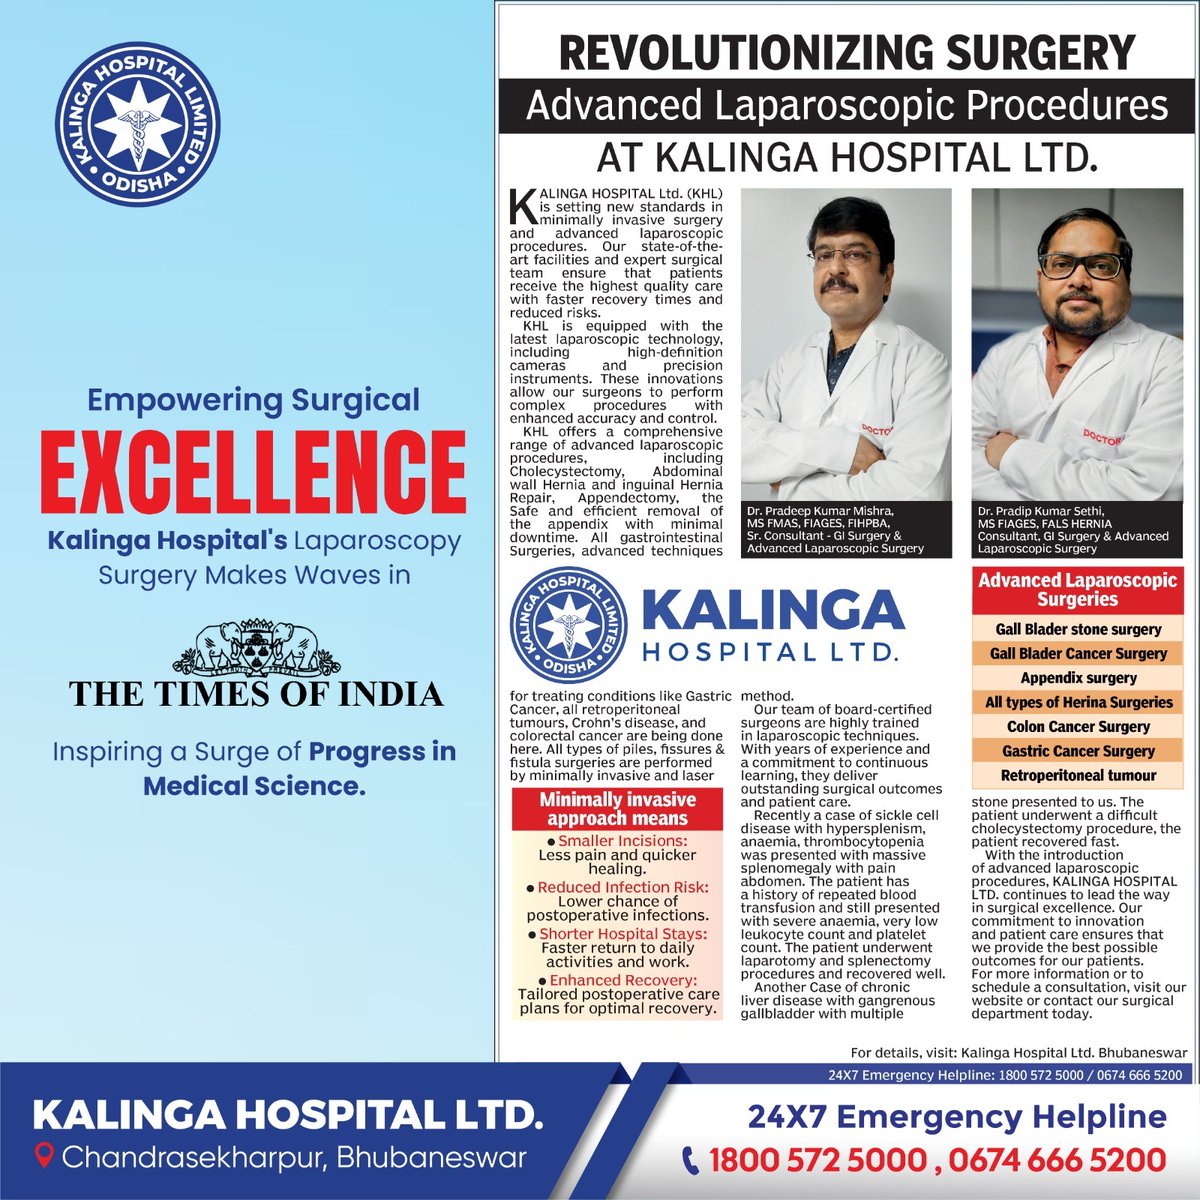 We're thrilled to share that Kalinga Hospital's Laparoscopy Surgery is making headlines in today's Times of India! Discover how we're revolutionizing surgical care with excellence and expertise. 

#Surgical #Laparoscopy #HealthcareNews #Healthcare #TimesOfIndia #PatientCare